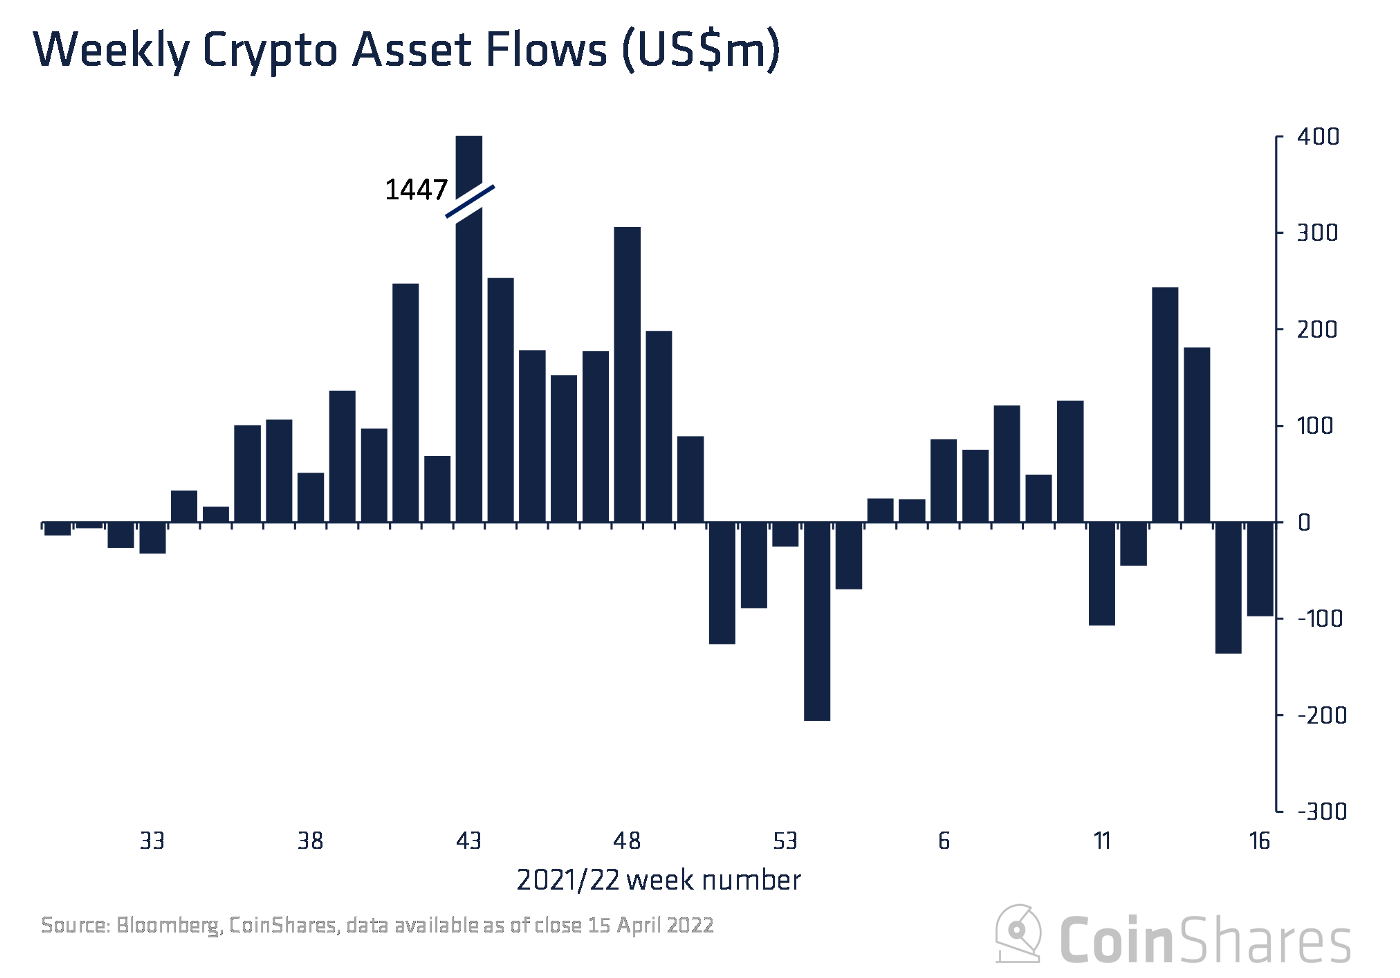 $97 million flowed out of digital asset funds in the week through April 15